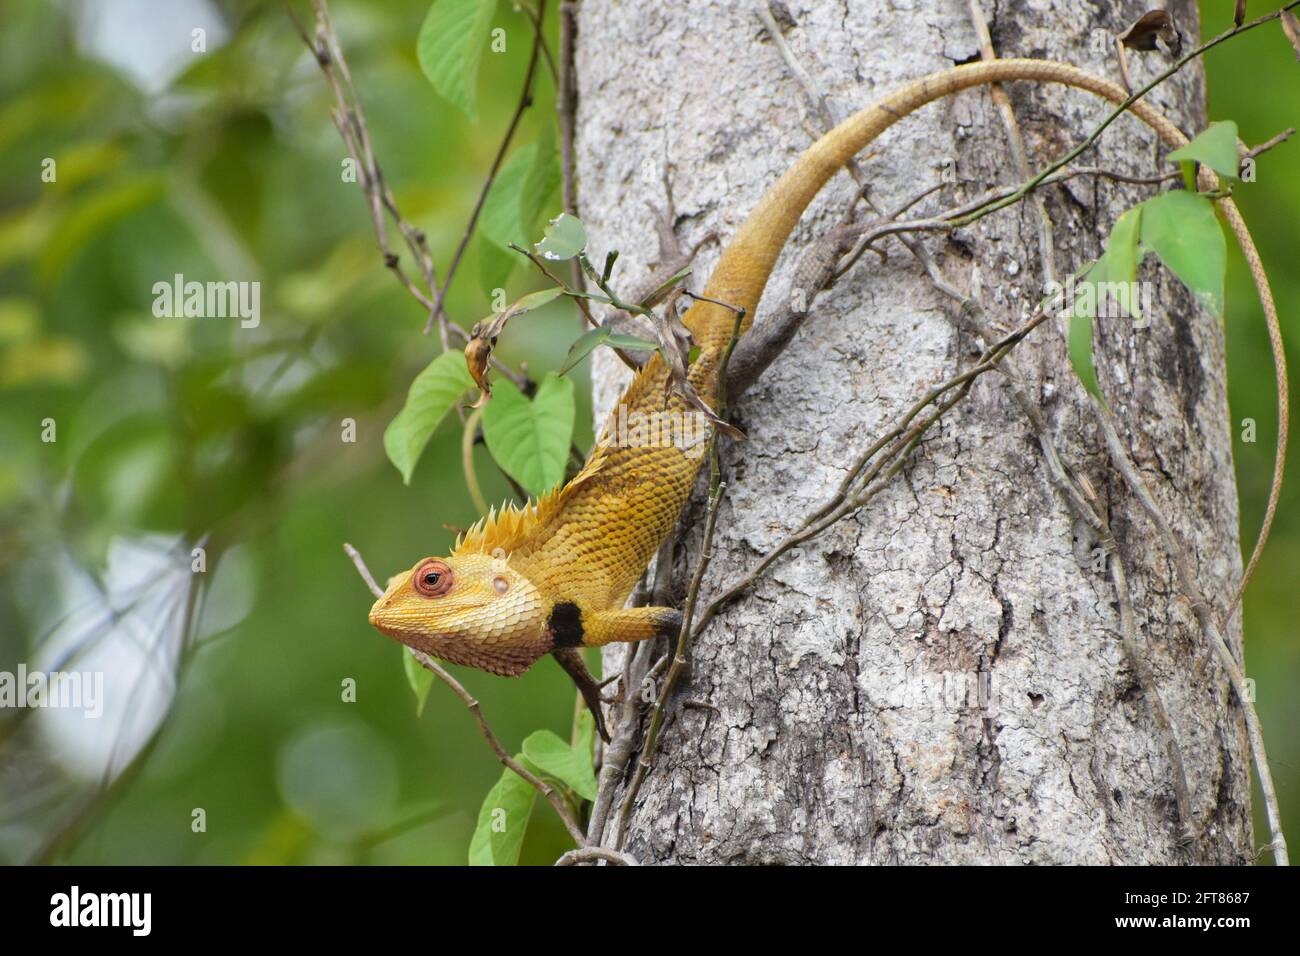 India Iguana High Resolution Stock Photography And Images Alamy